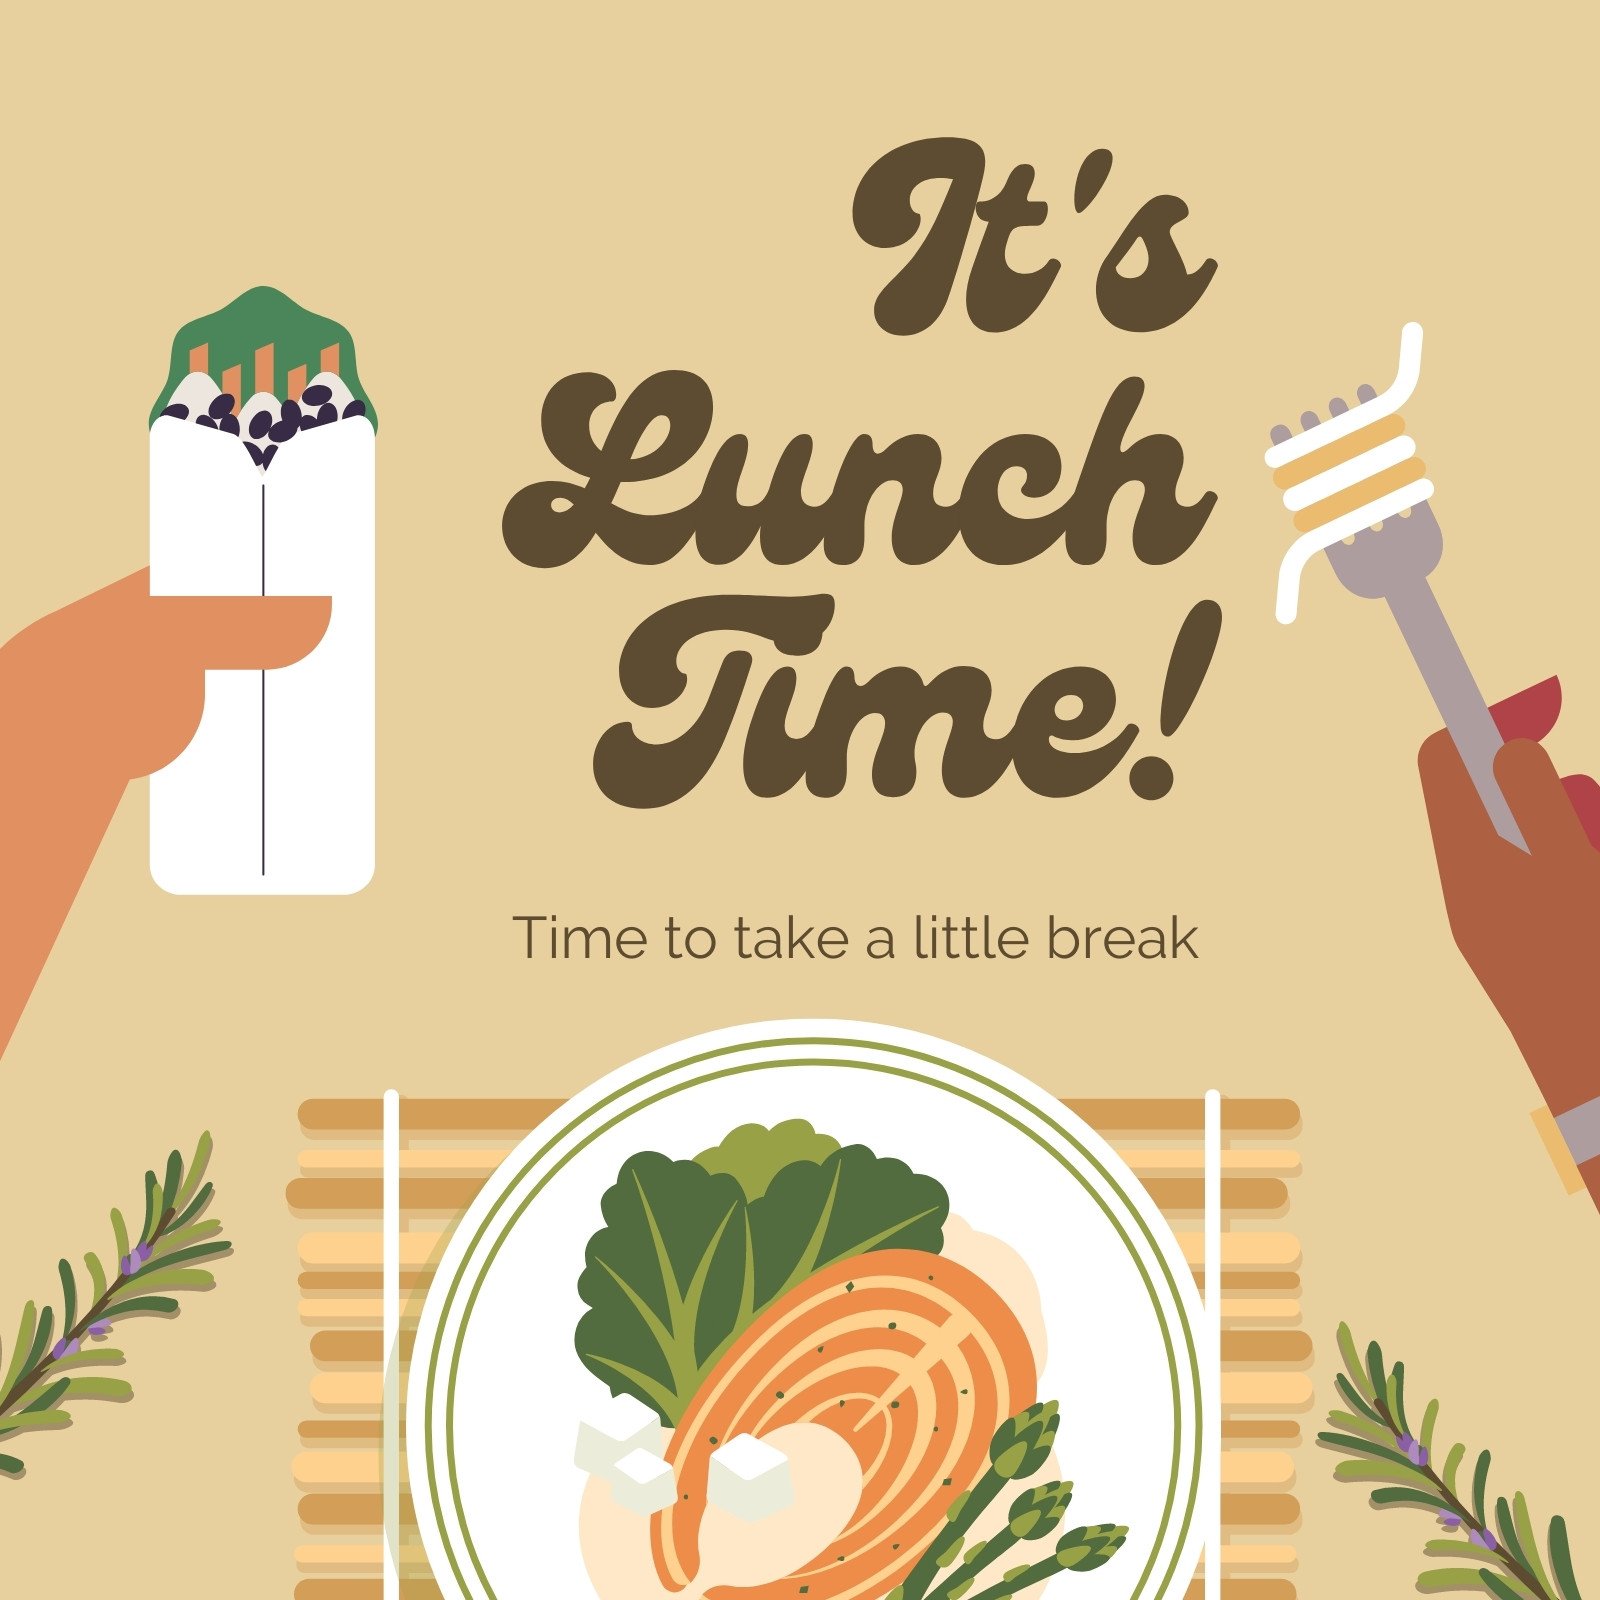 happy lunch time images